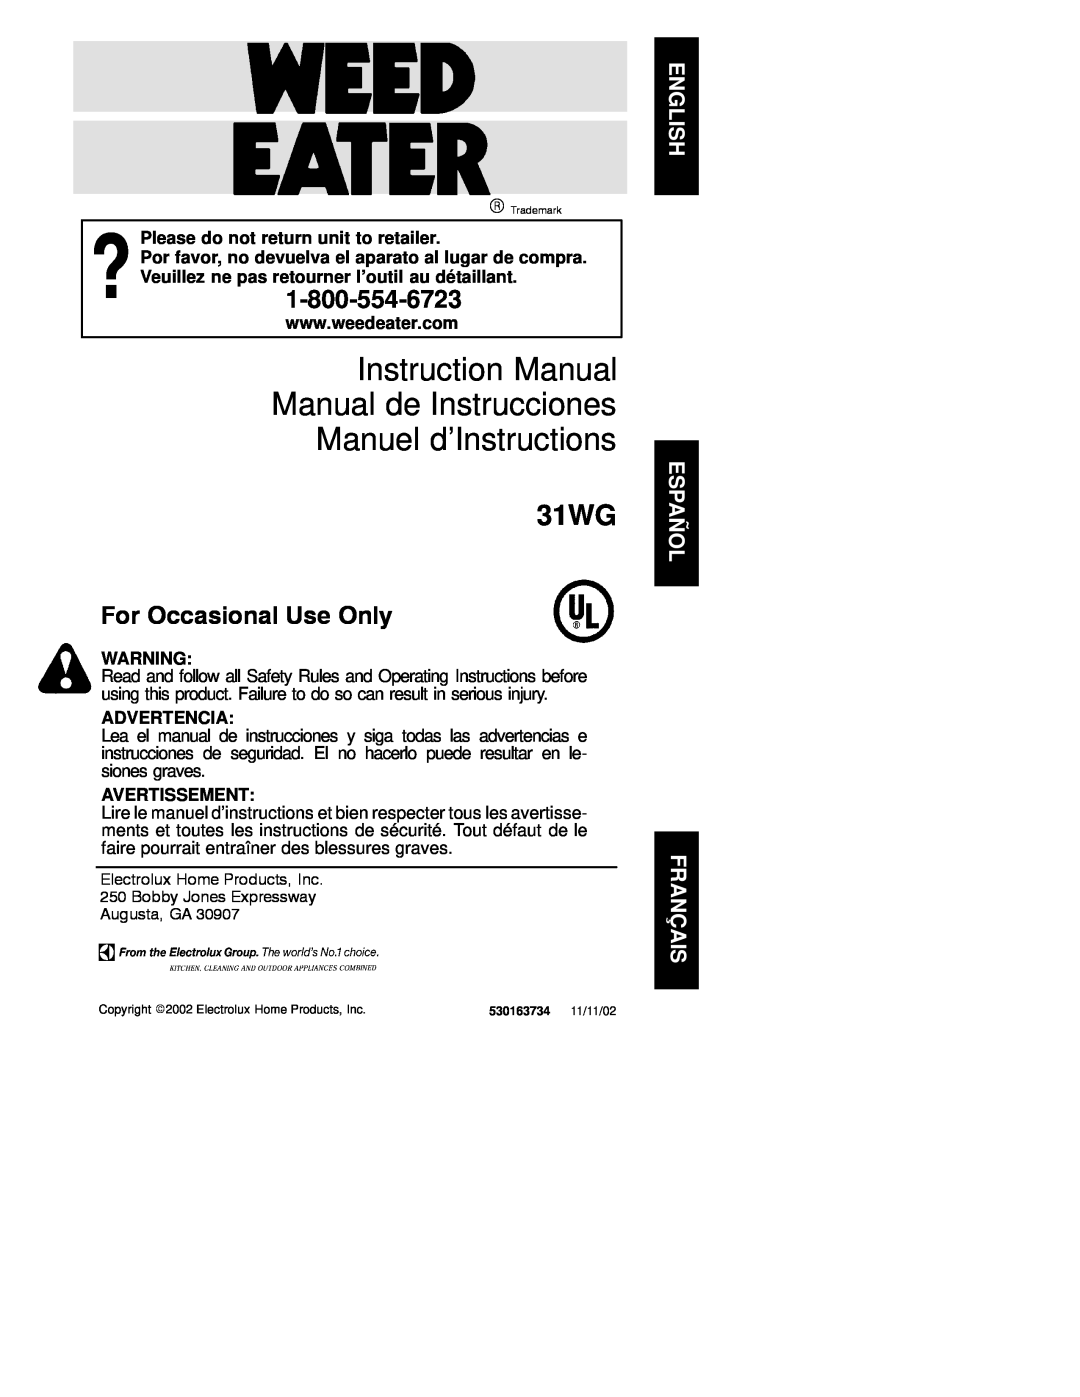 Weed Eater 530163734 instruction manual Please do not return unit to retailer, Advertencia, Avertissement, 31WG 